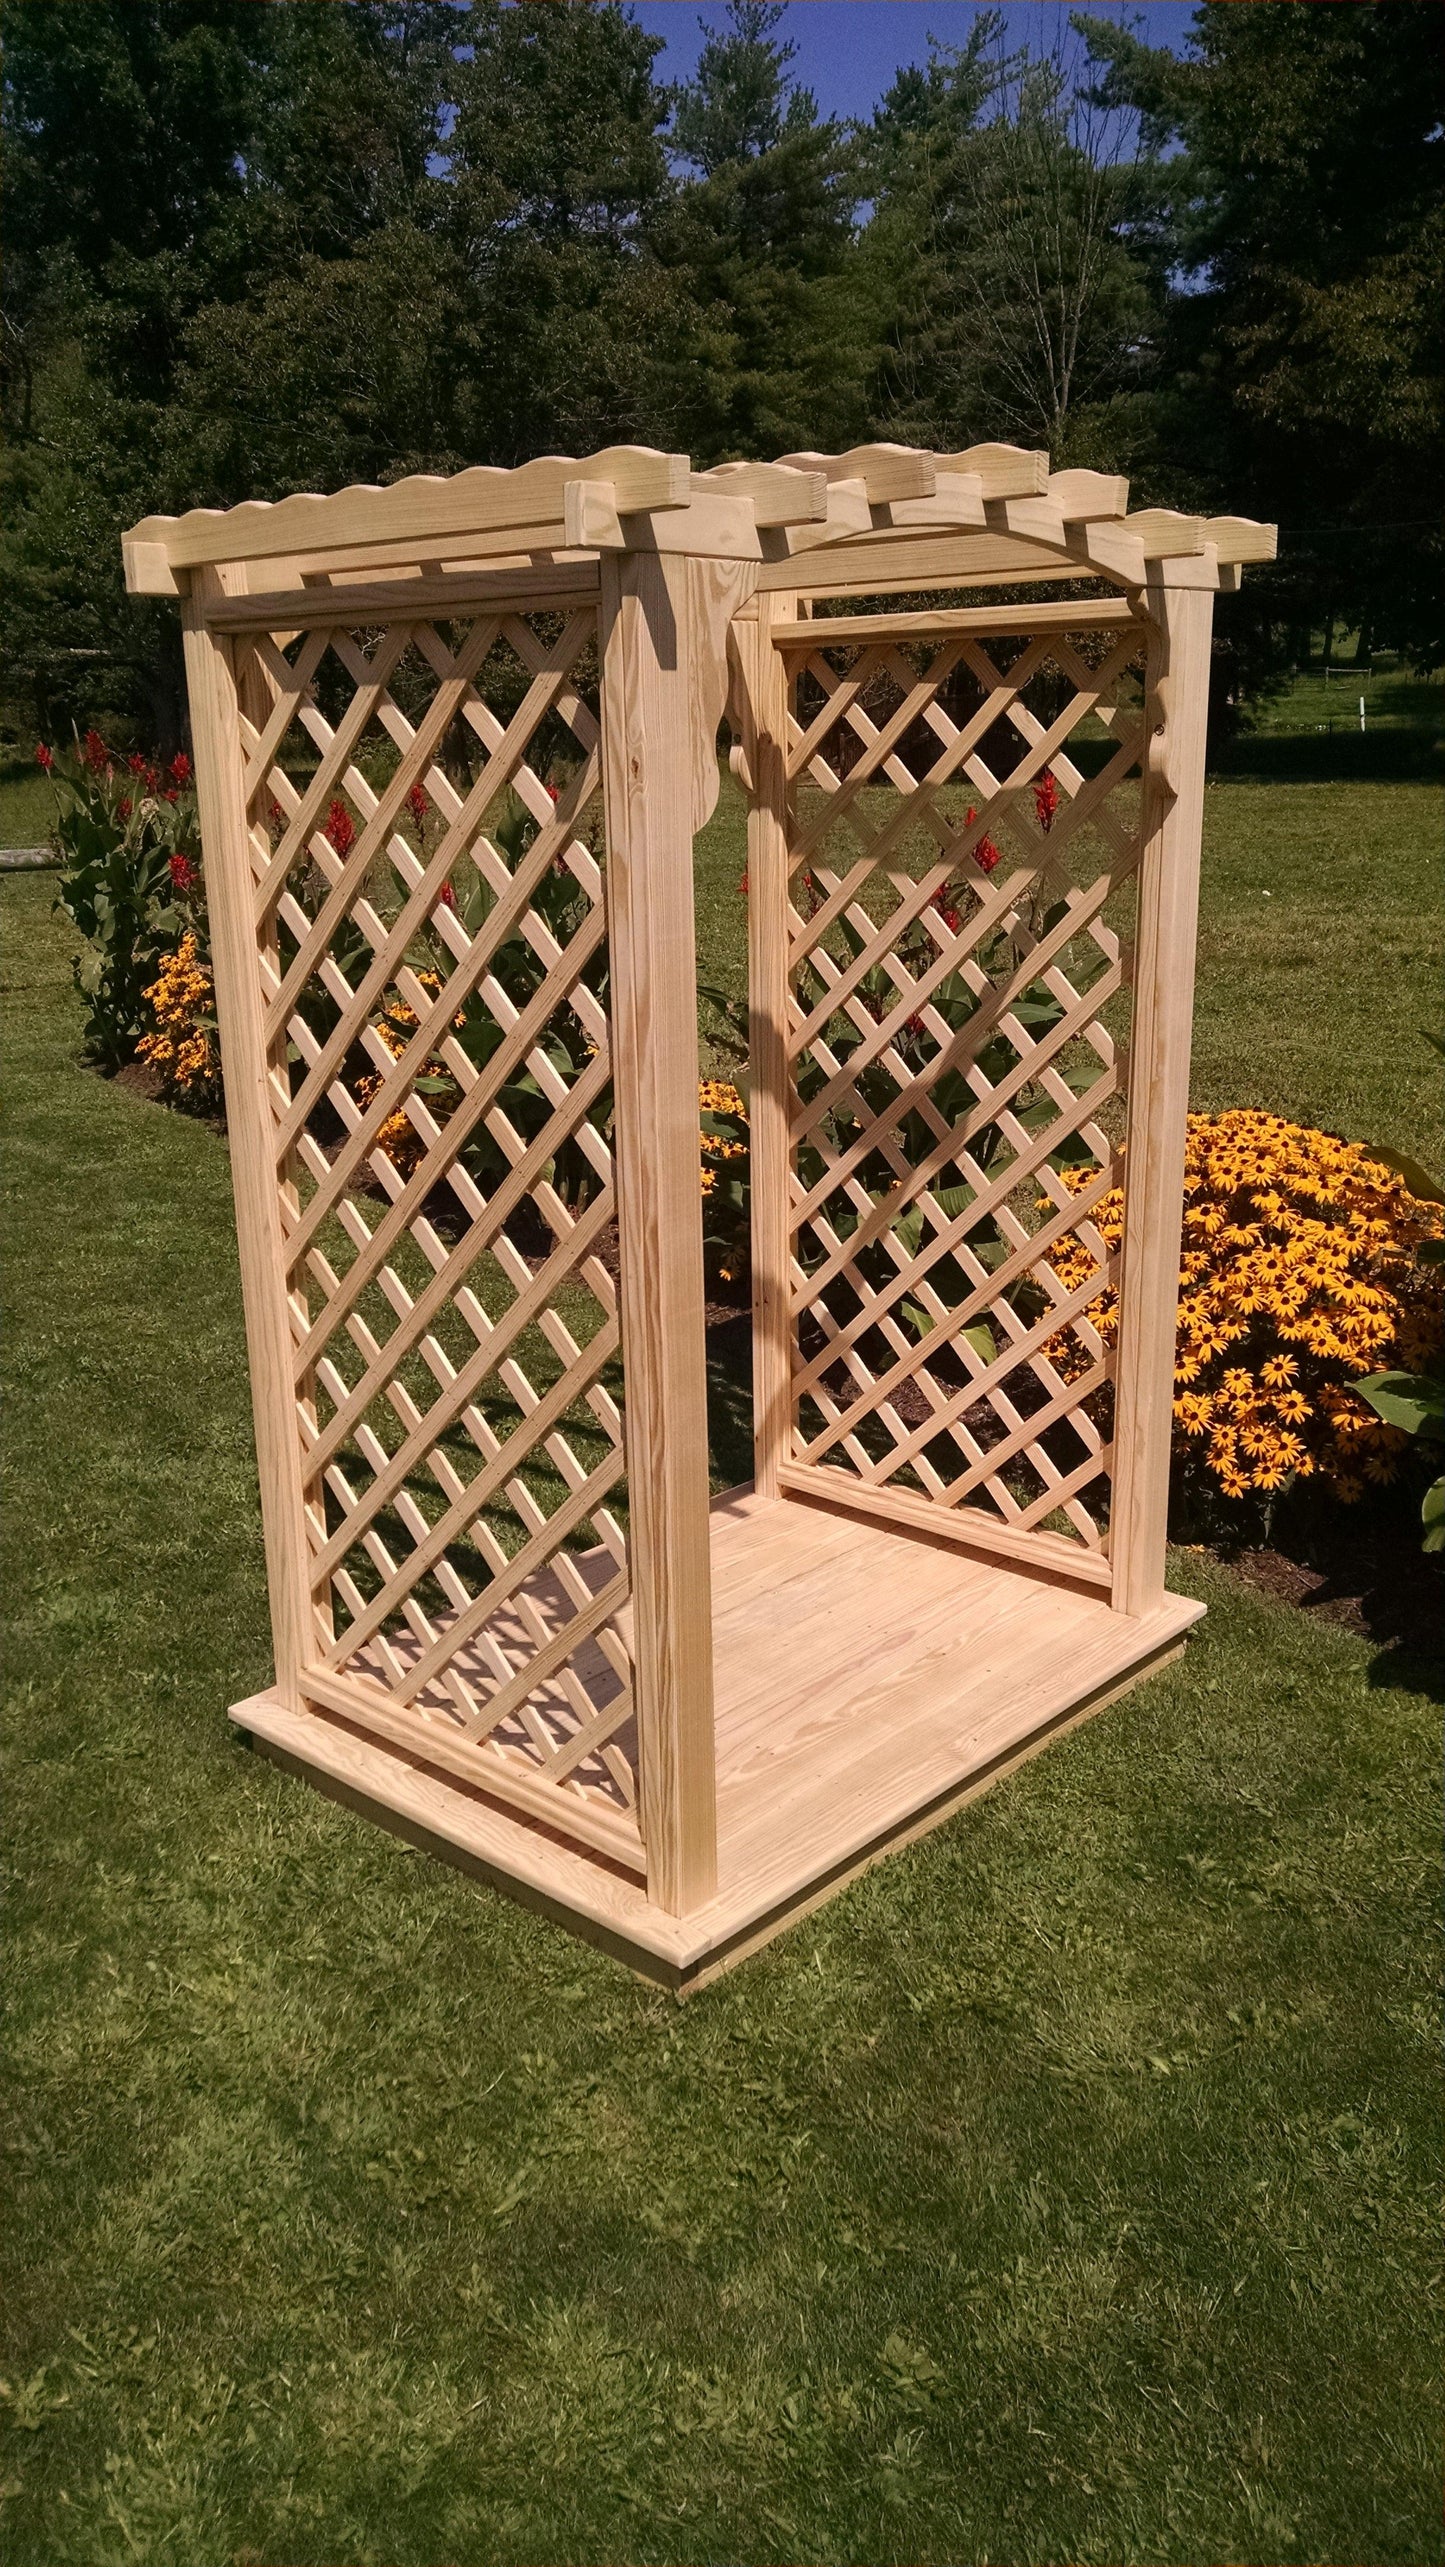 A&L FURNITURE CO. 5' Jamesport Pressure Treated Pine Arbor & Deck - LEAD TIME TO SHIP 10 BUSINESS DAYS